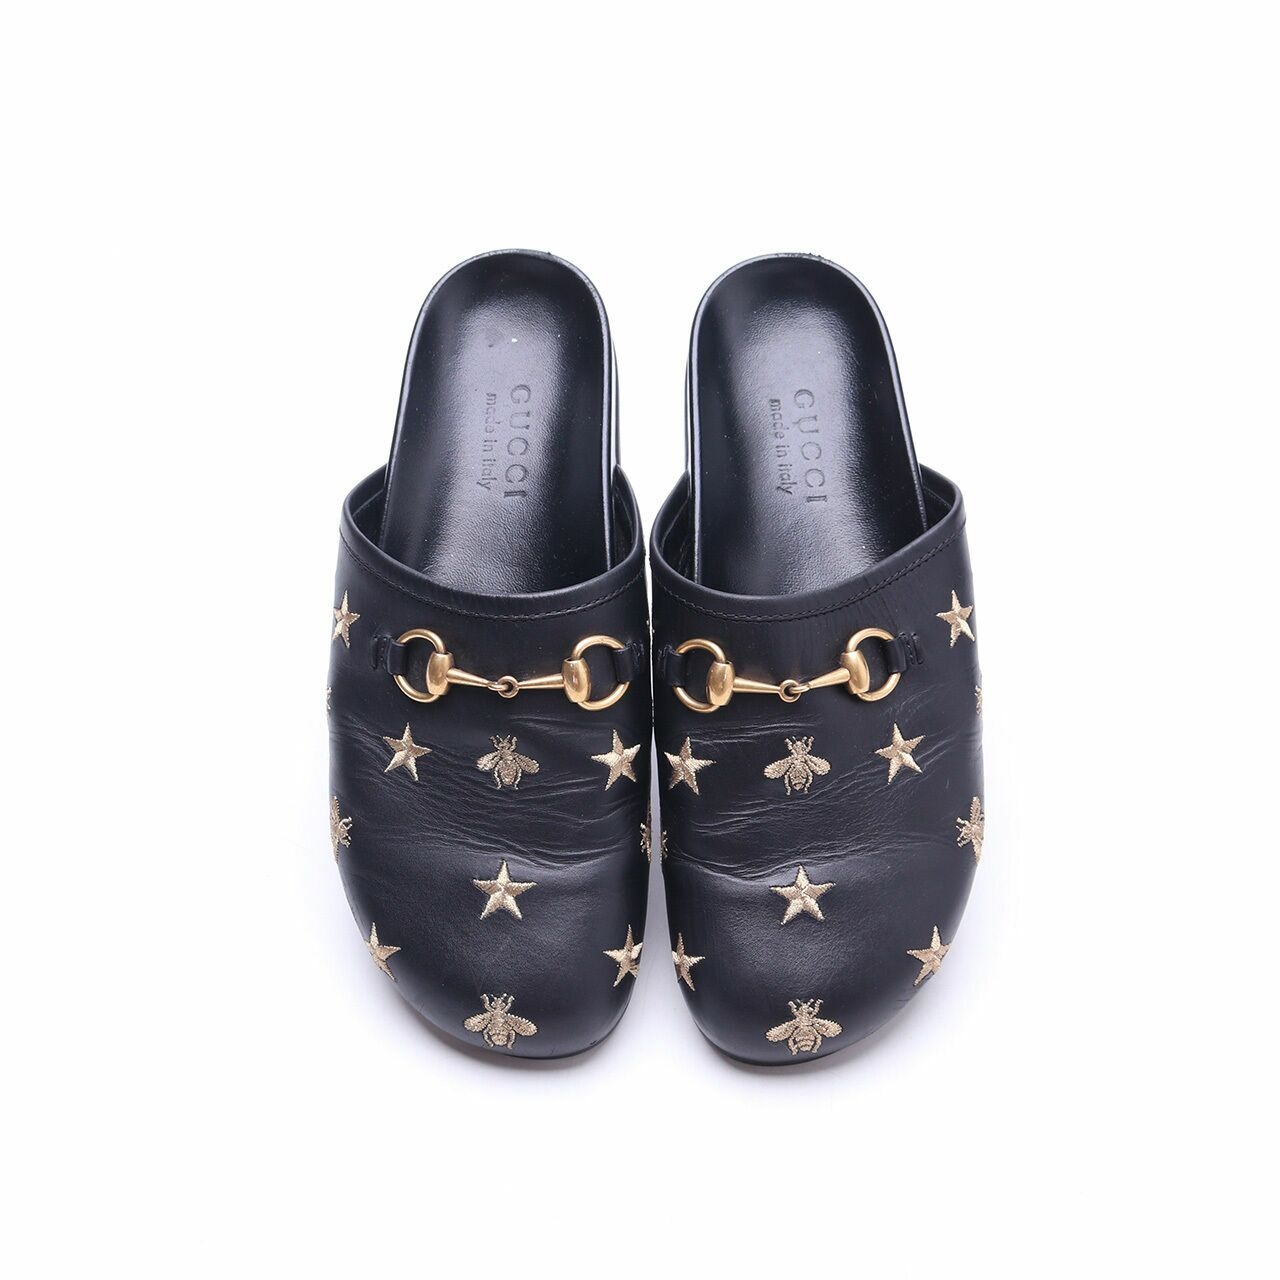 Gucci Horsebit Leather Bee and Star Black Sandals 